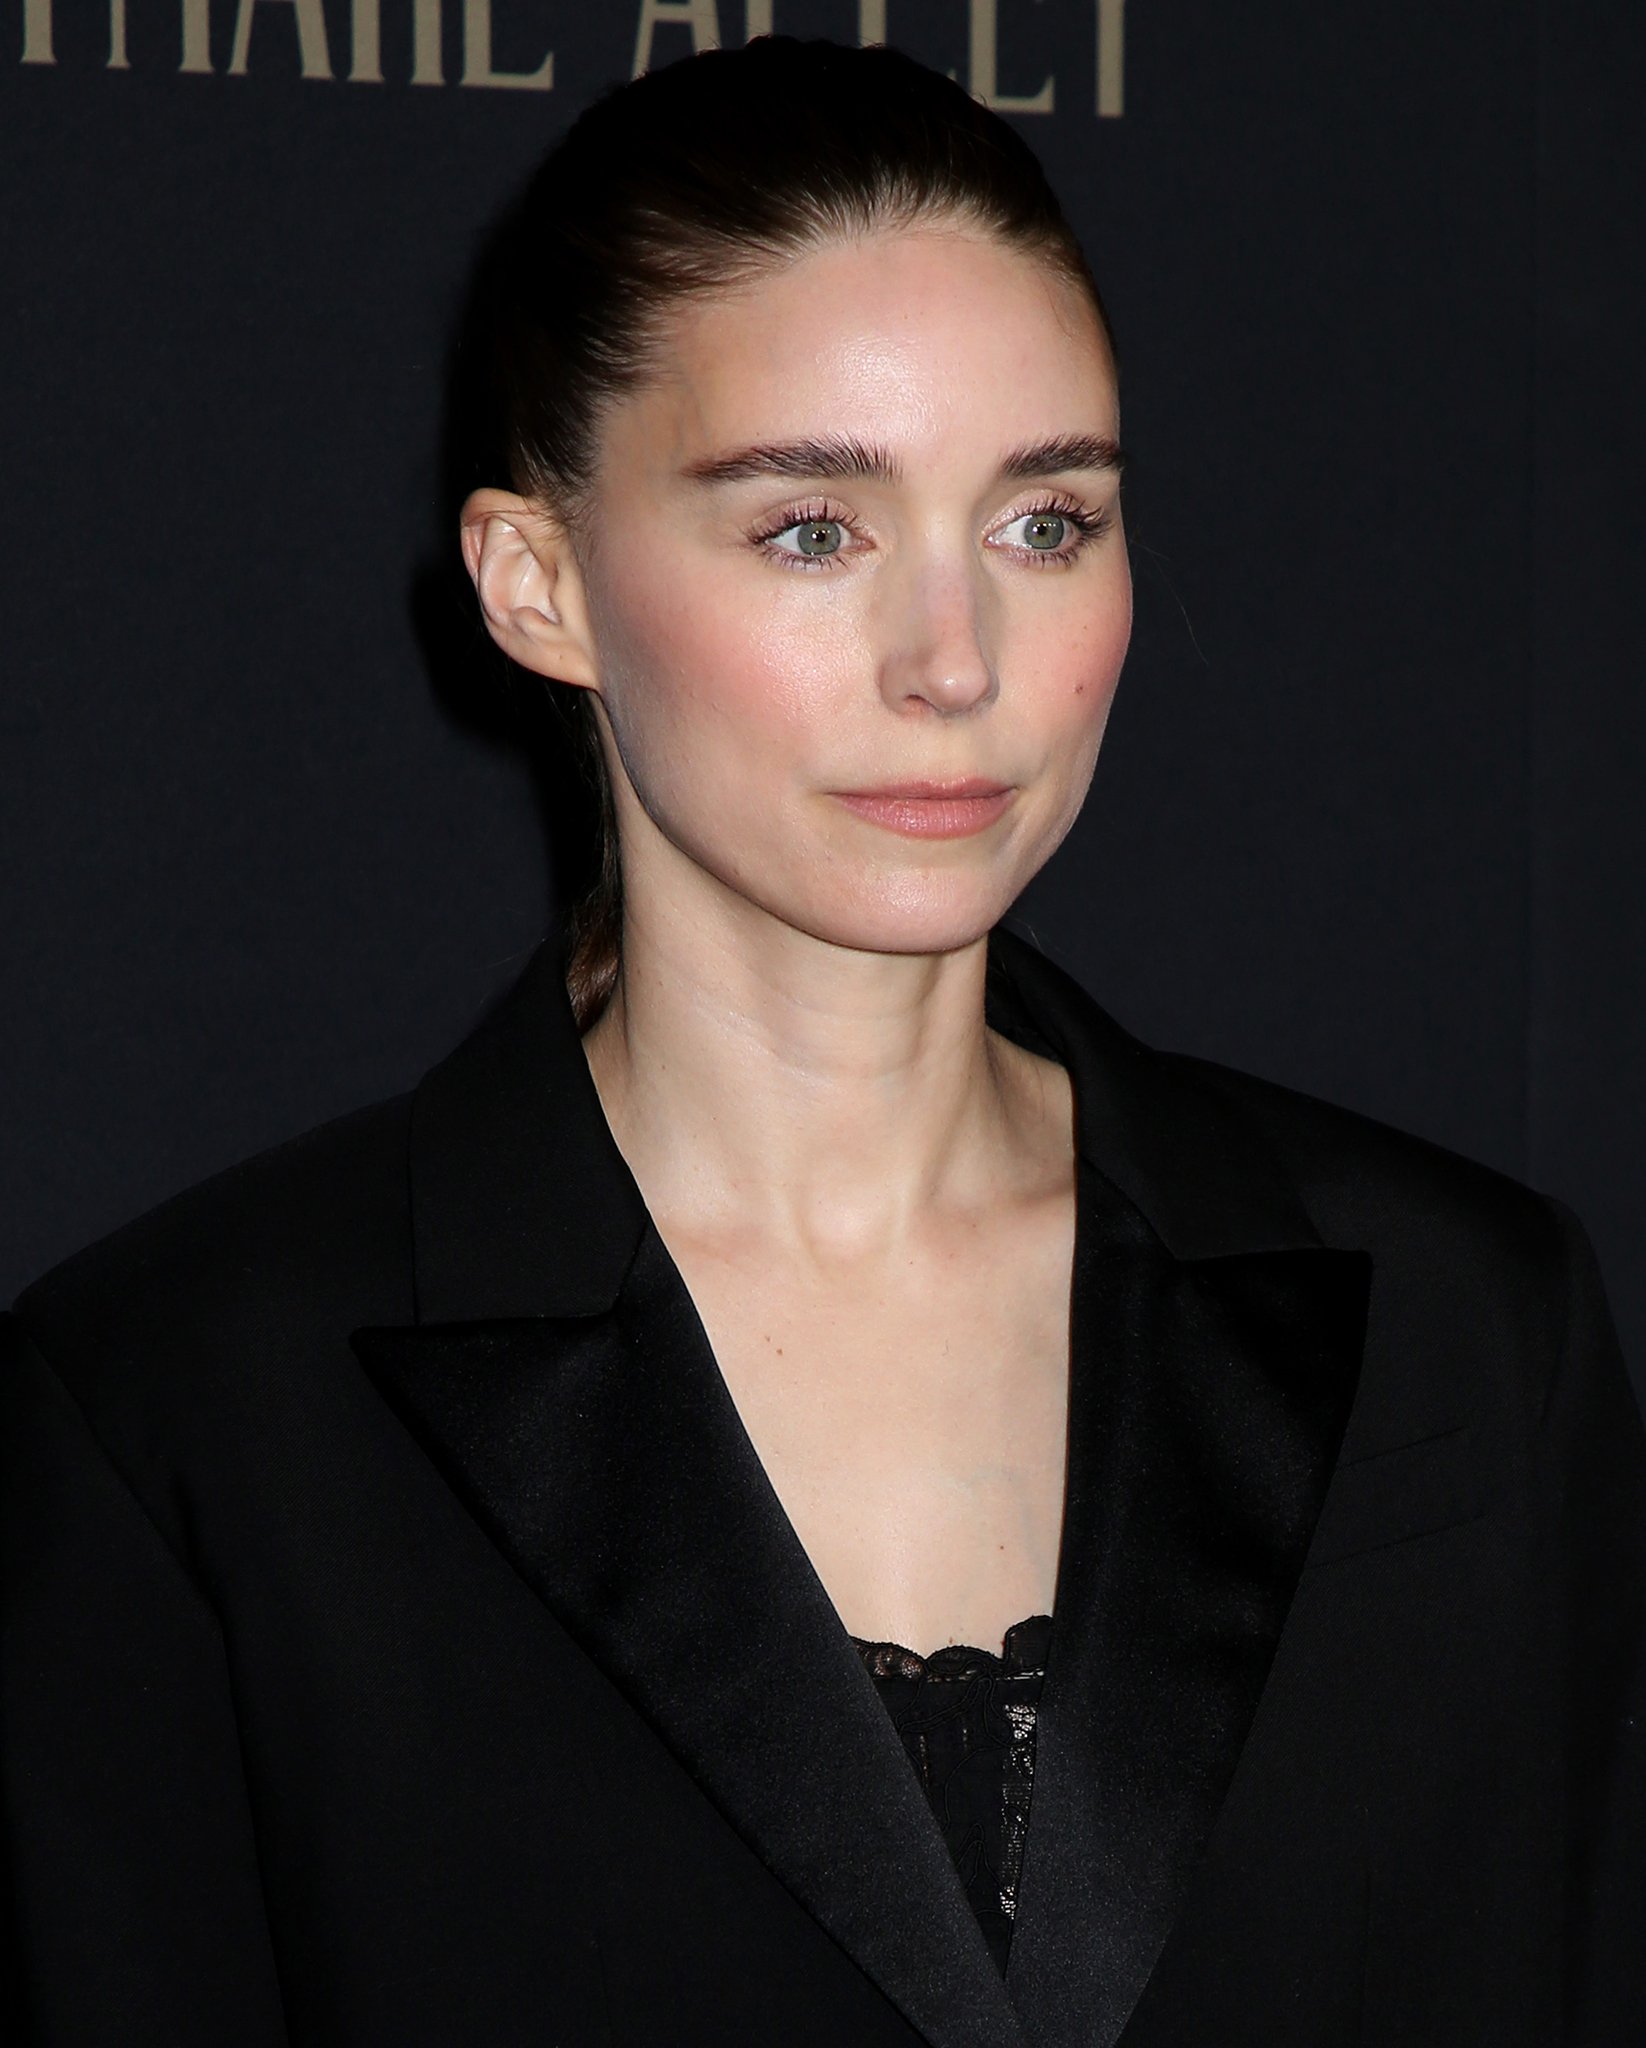 Rooney Mara wears a neat bun with brushed up brows, coral pink lipstick, blush, and mascara